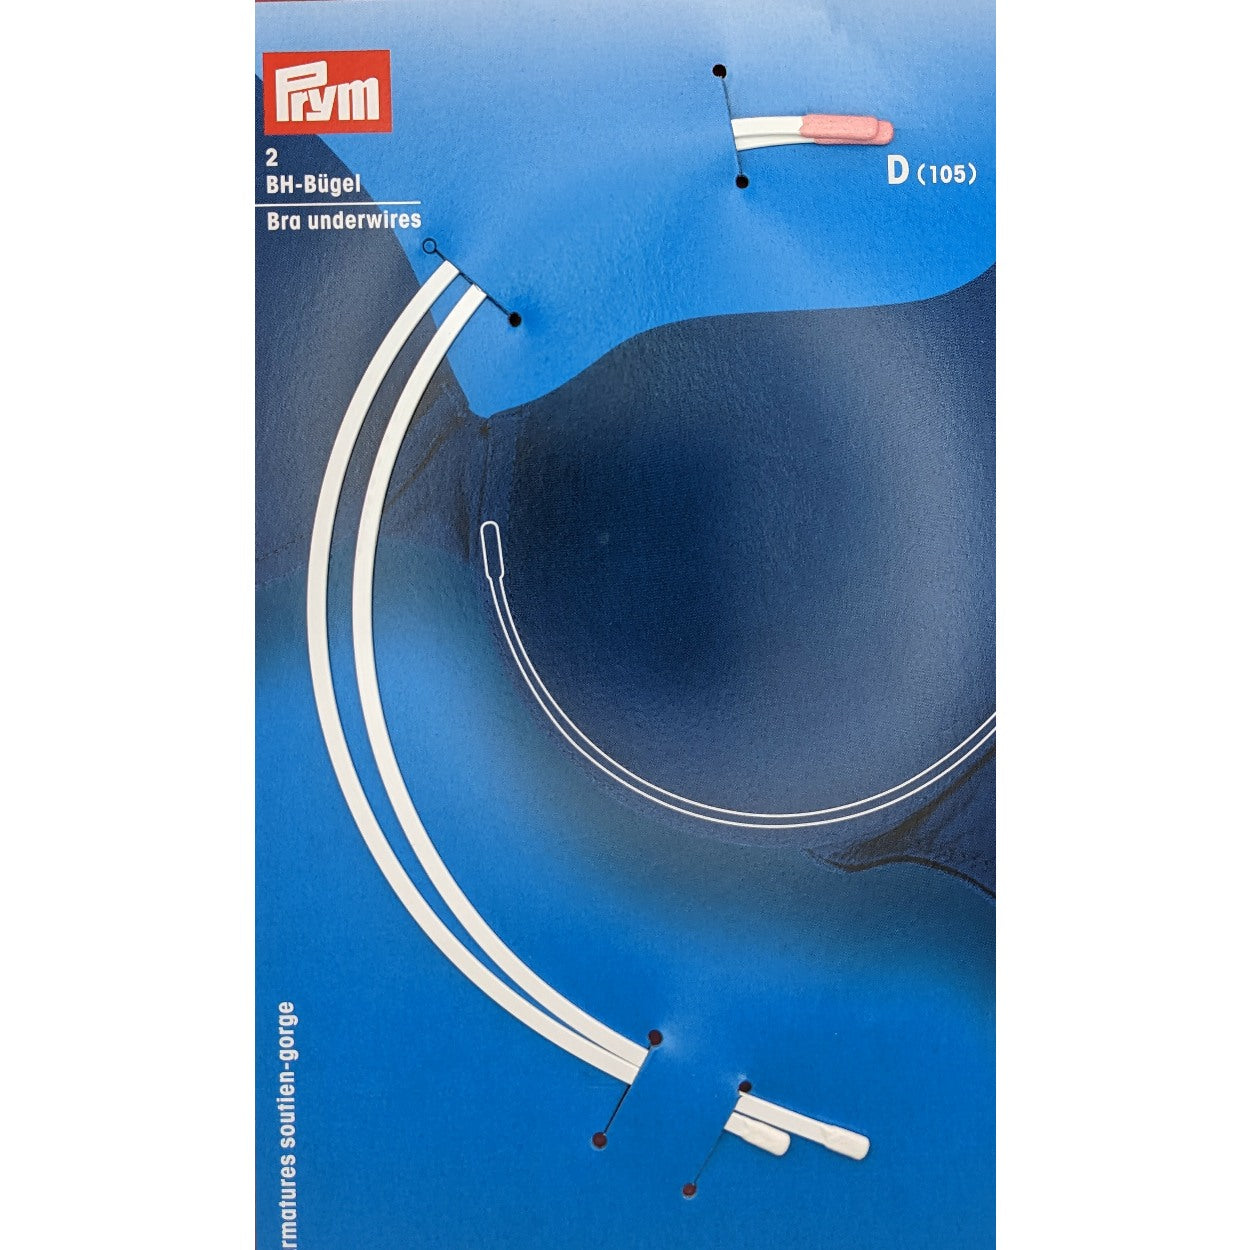 Prym Bra Underwire - pack of 2 from Jaycotts Sewing Supplies